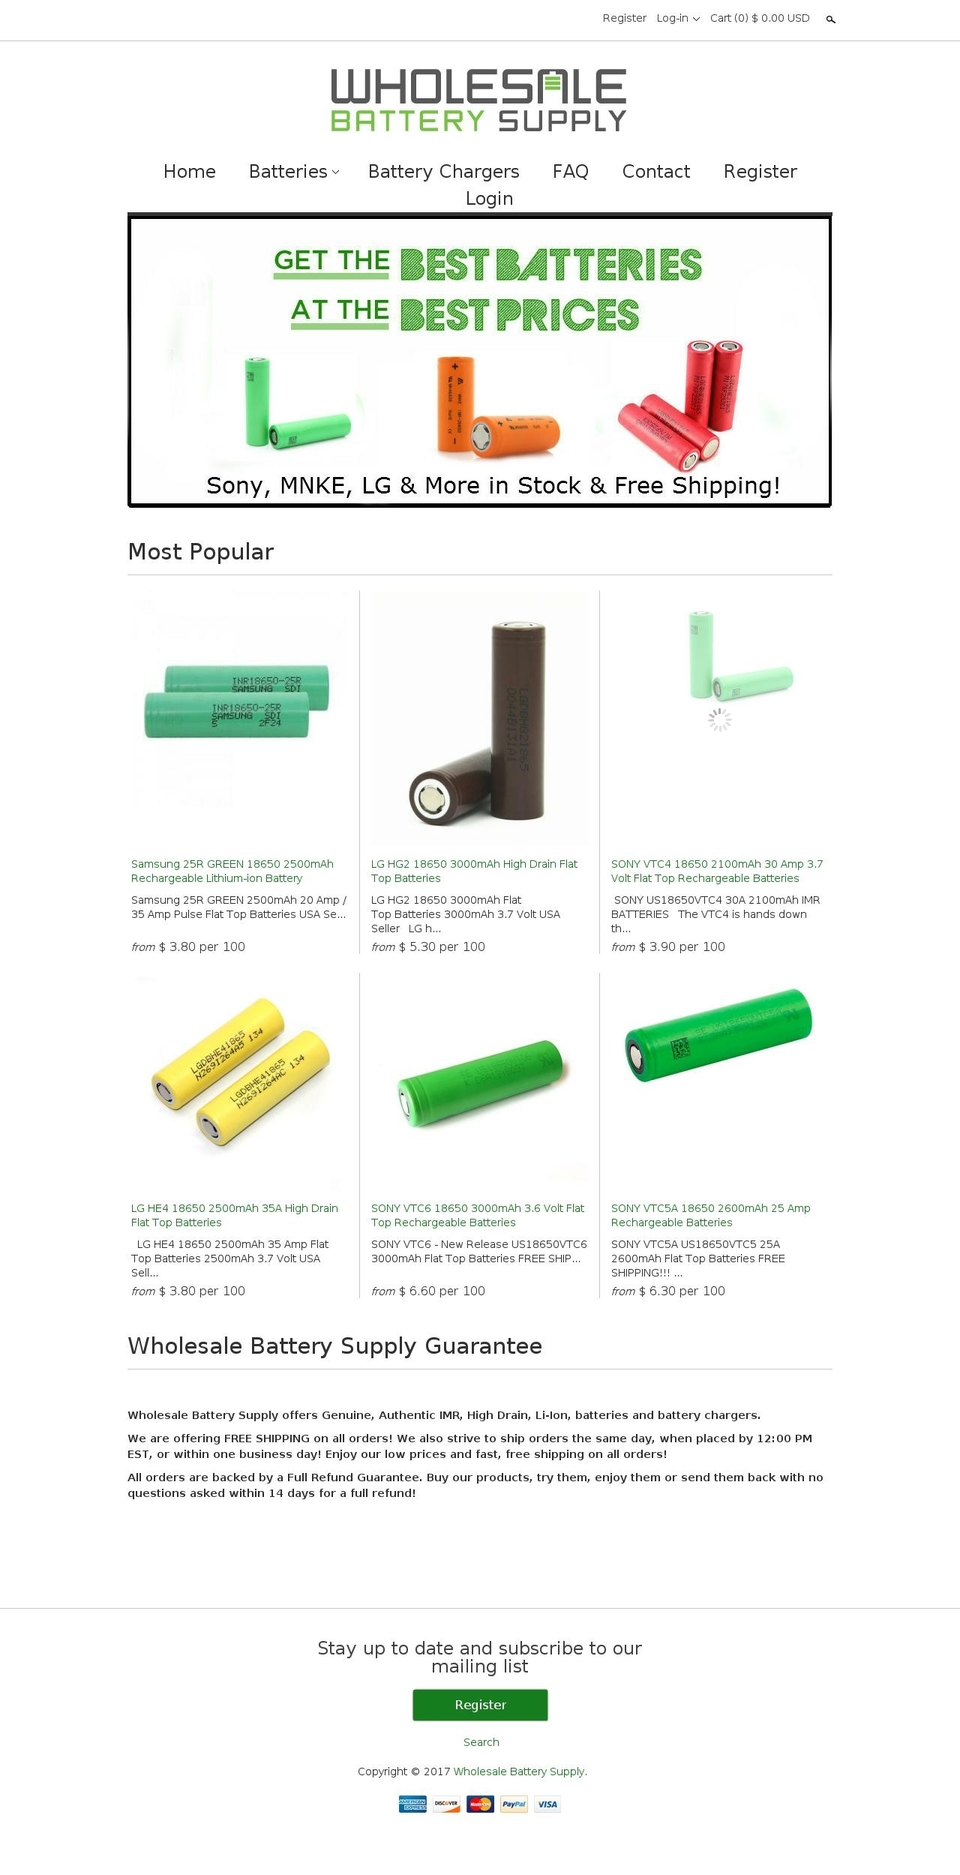 Clean Shopify theme site example wholesalebatterysupply.com